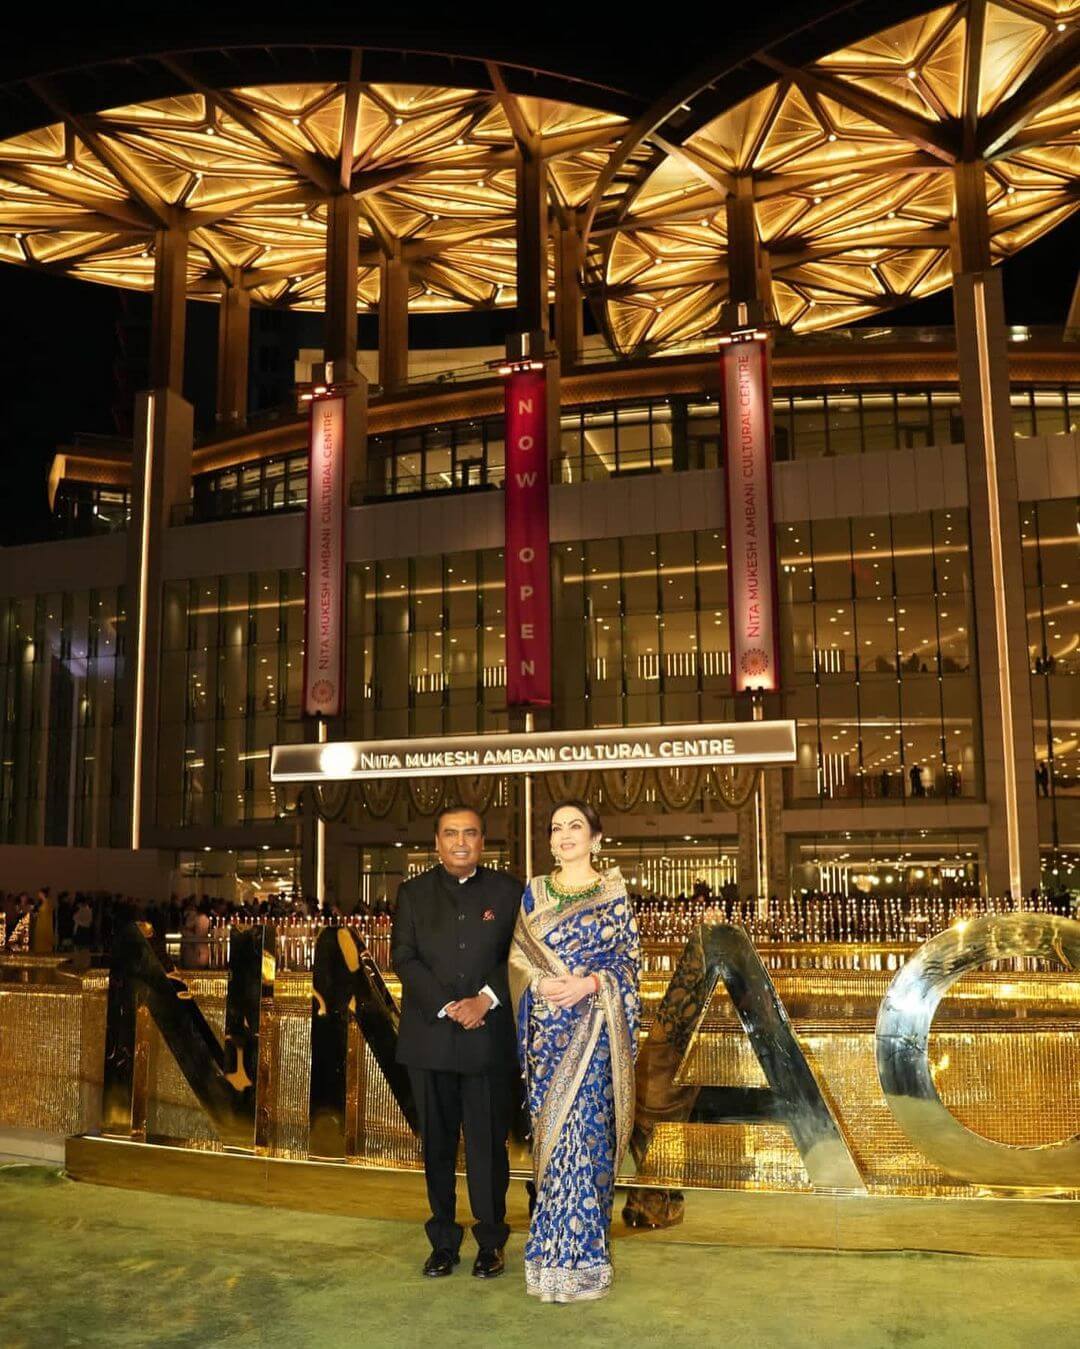 The Nita Mukesh Ambani Cultural Centre Is Just What India Needs